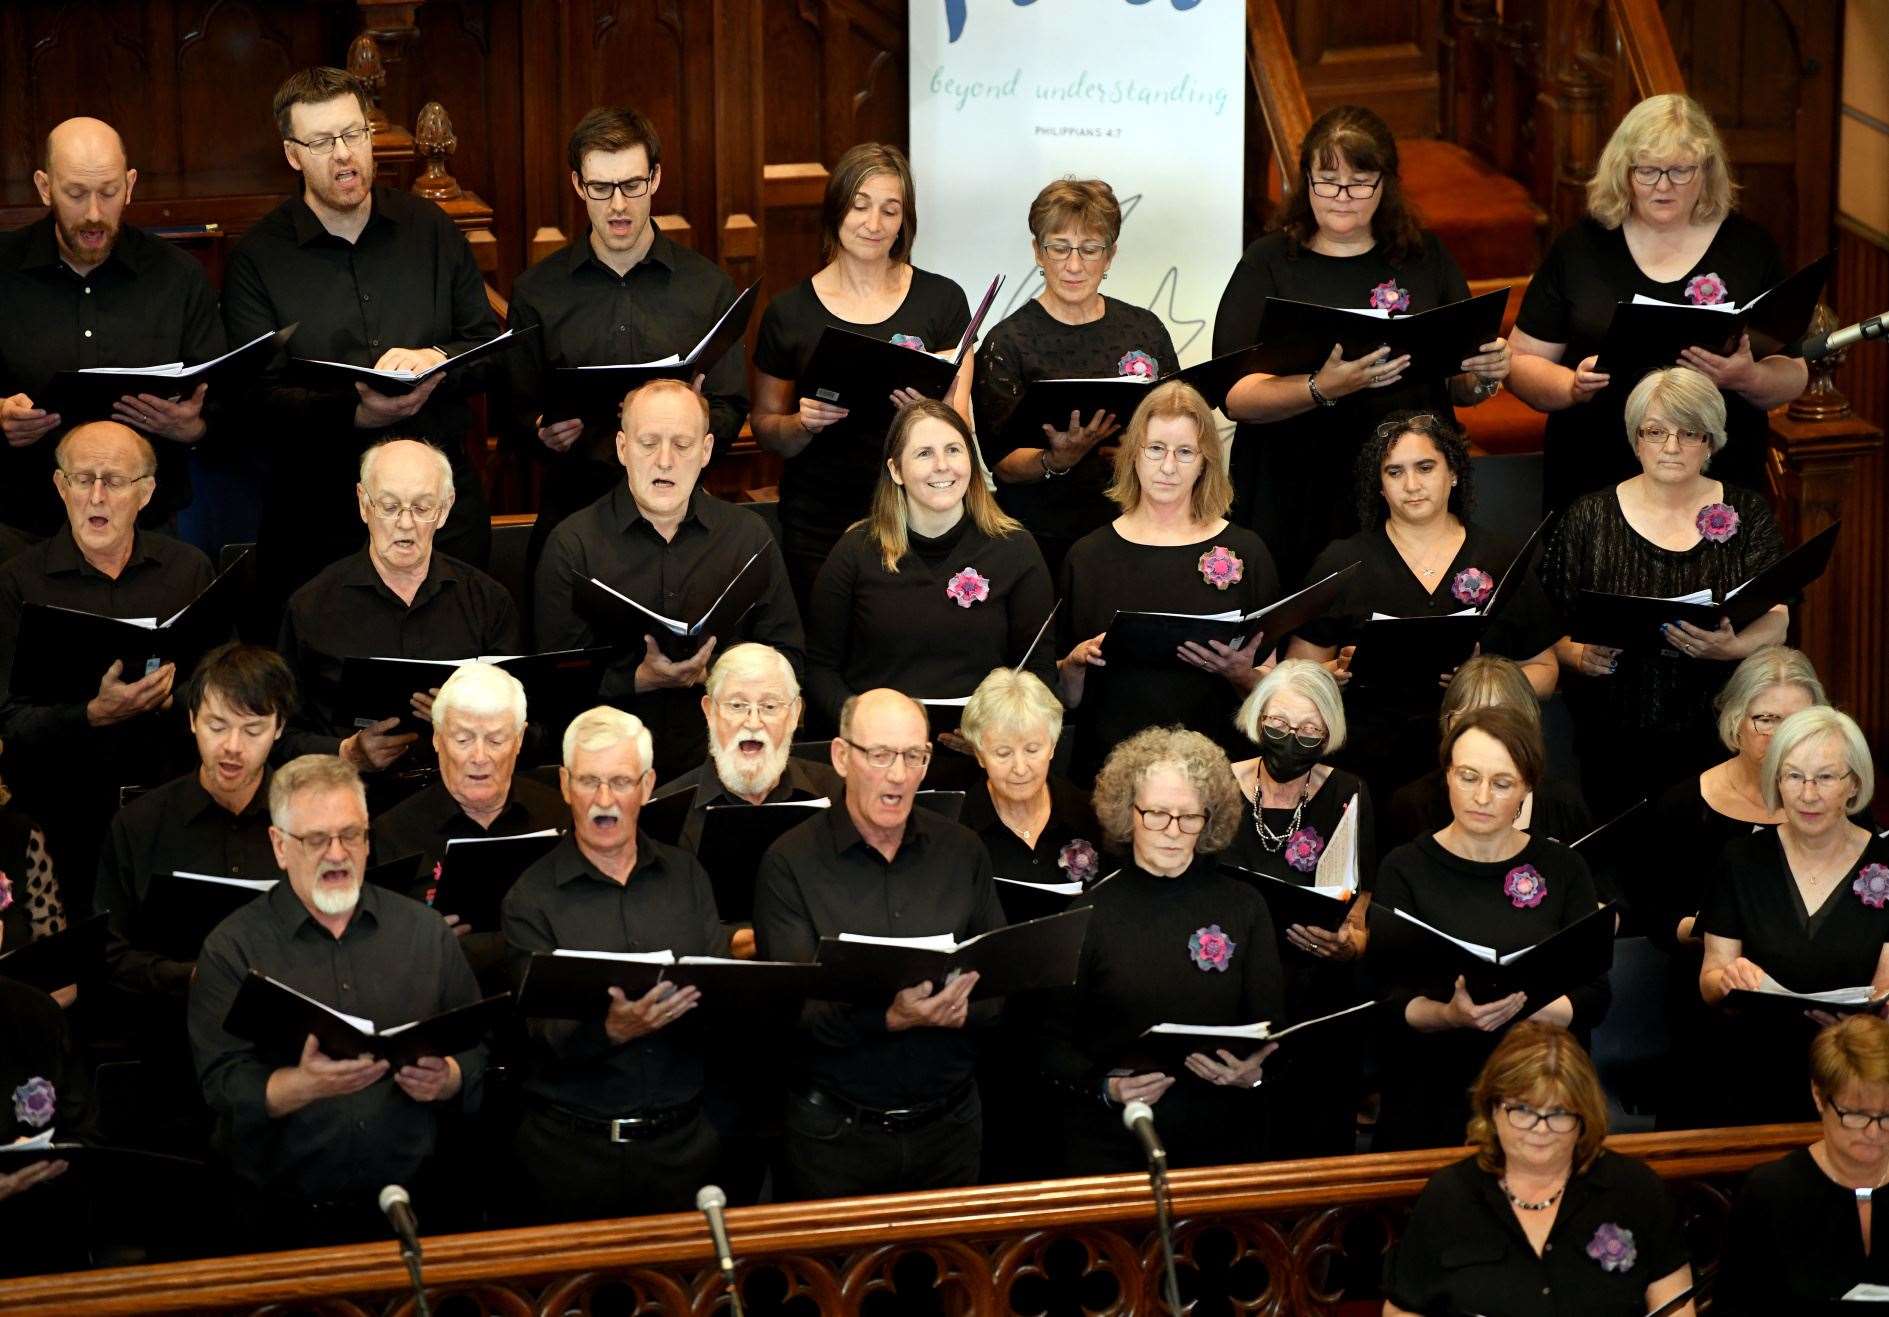 Acclaim choir performed at the Free North Church in Inverness.